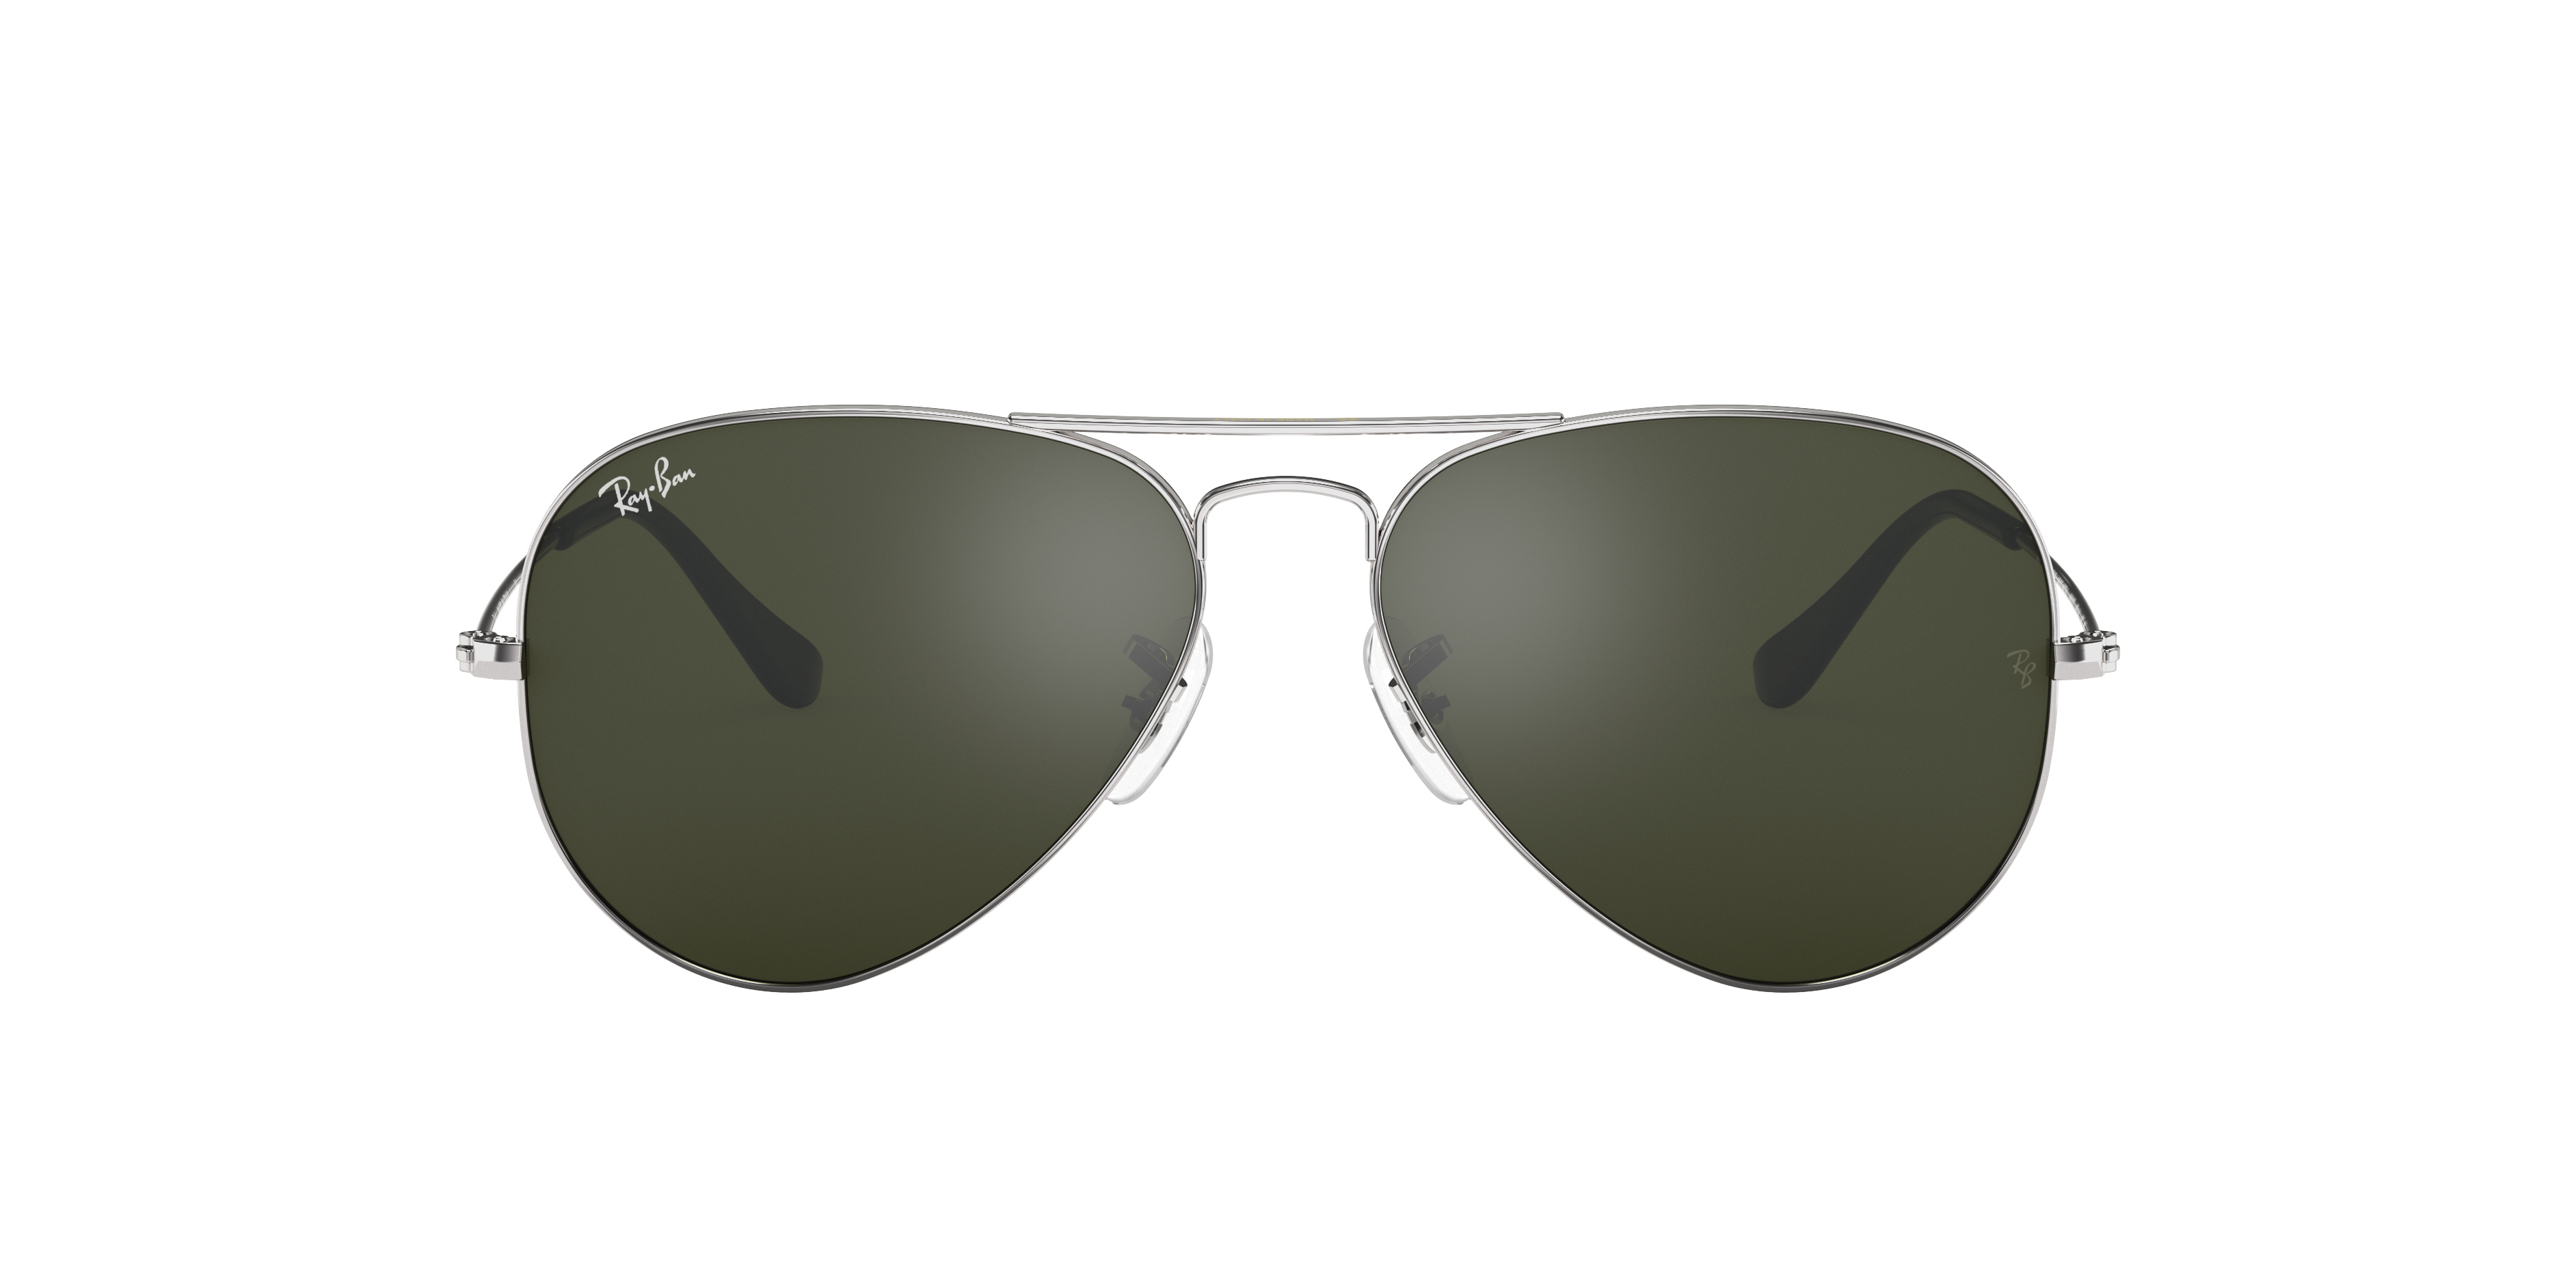 ray ban aviator models with prices